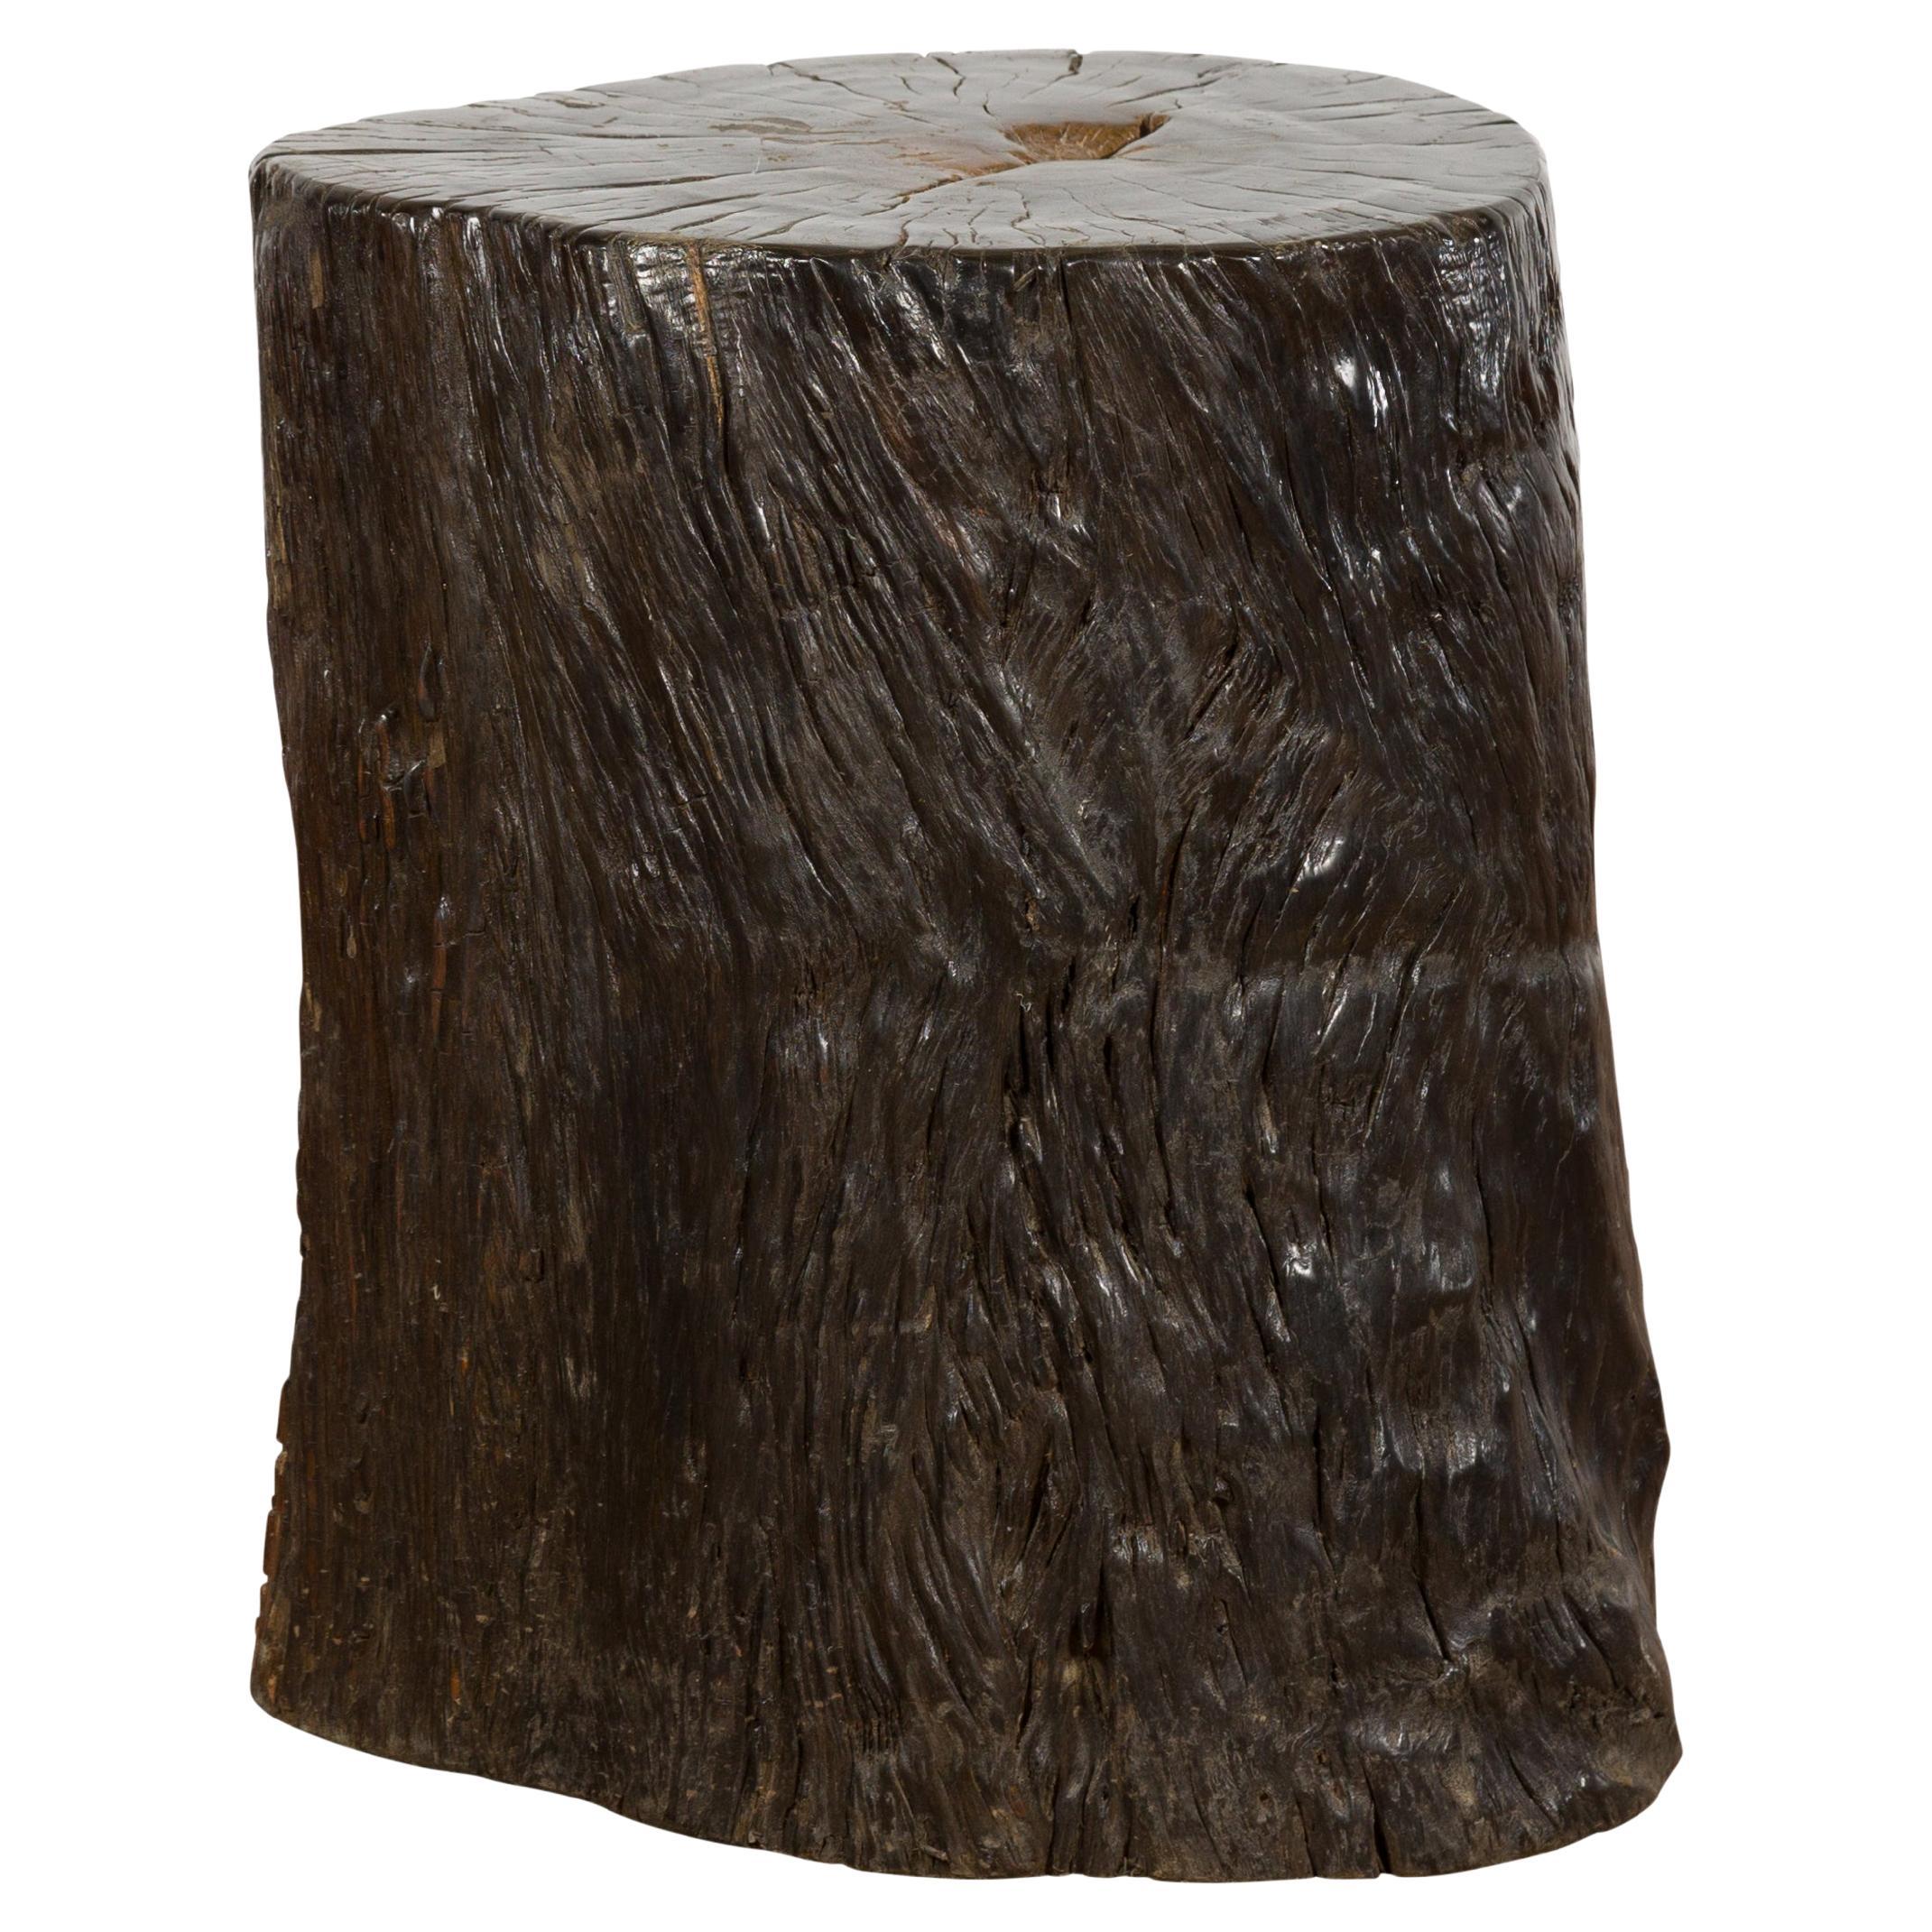 Dark Brown Wooden Tree Stump End Table For Sale